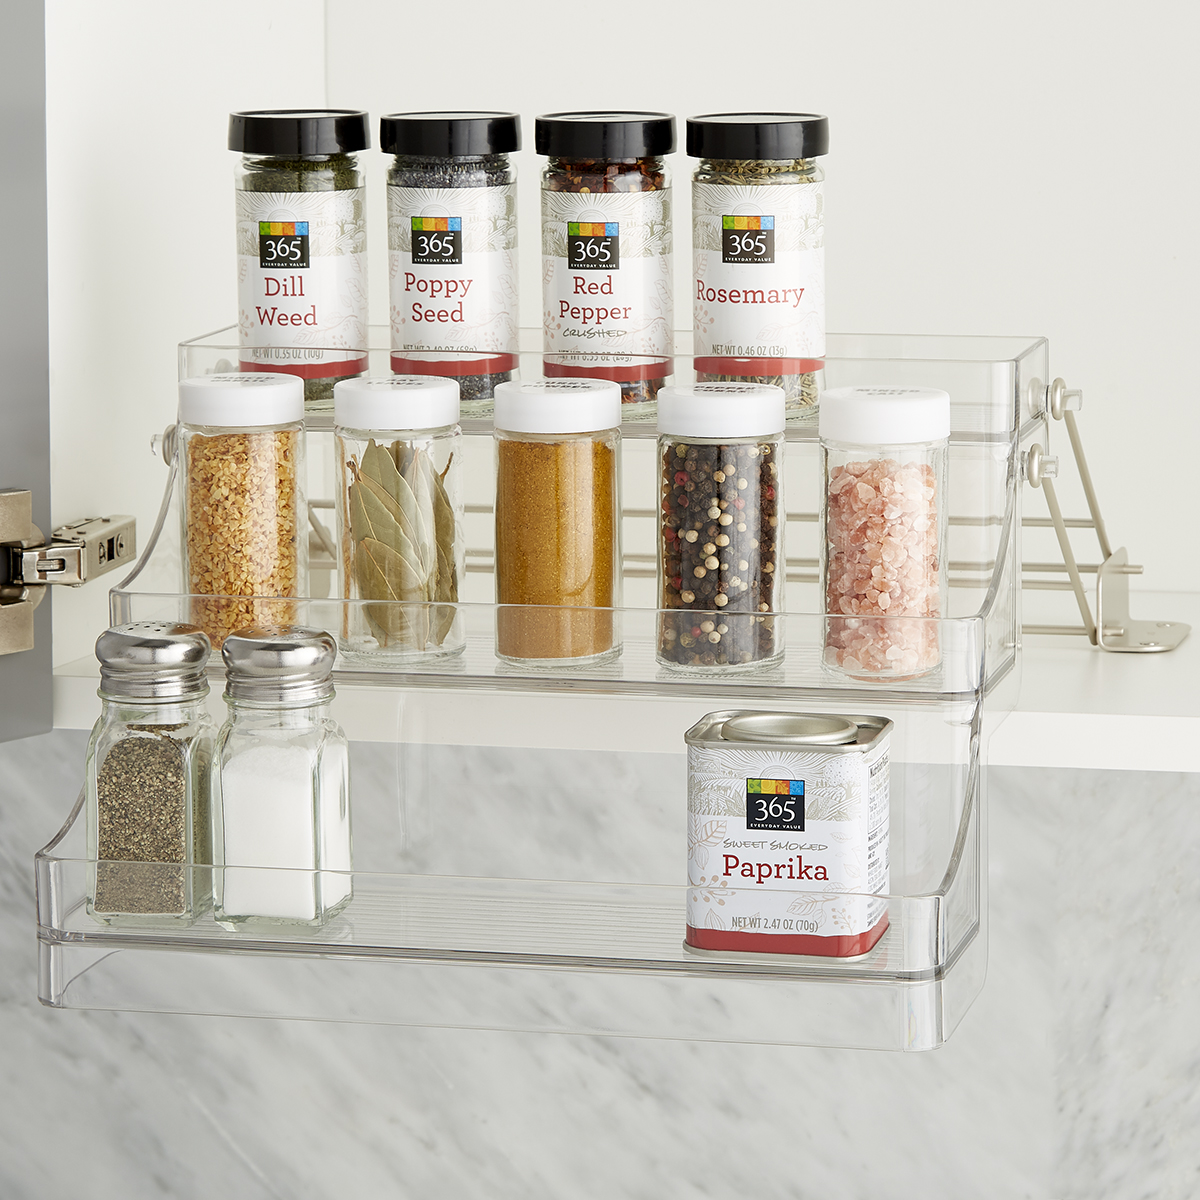 https://www.containerstore.com/catalogimages/335488/10073696-Linus-Easy-Reach-Spice-Rack.jpg